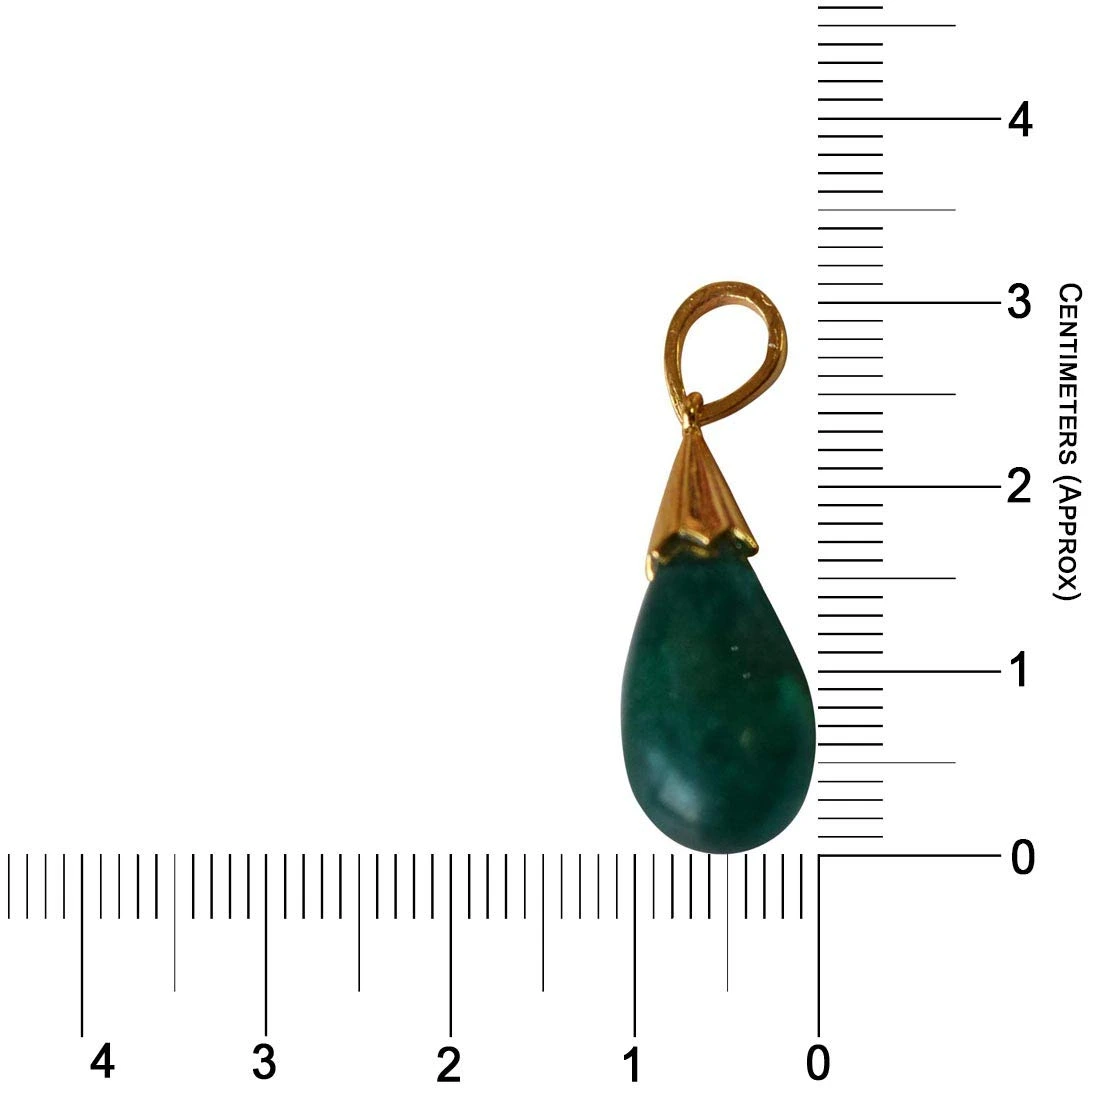 19.30 cts Real Drop Green Onyx Sterling Silver Pendant with Gold Finished Chain for Women (SDS319-19.38cts)